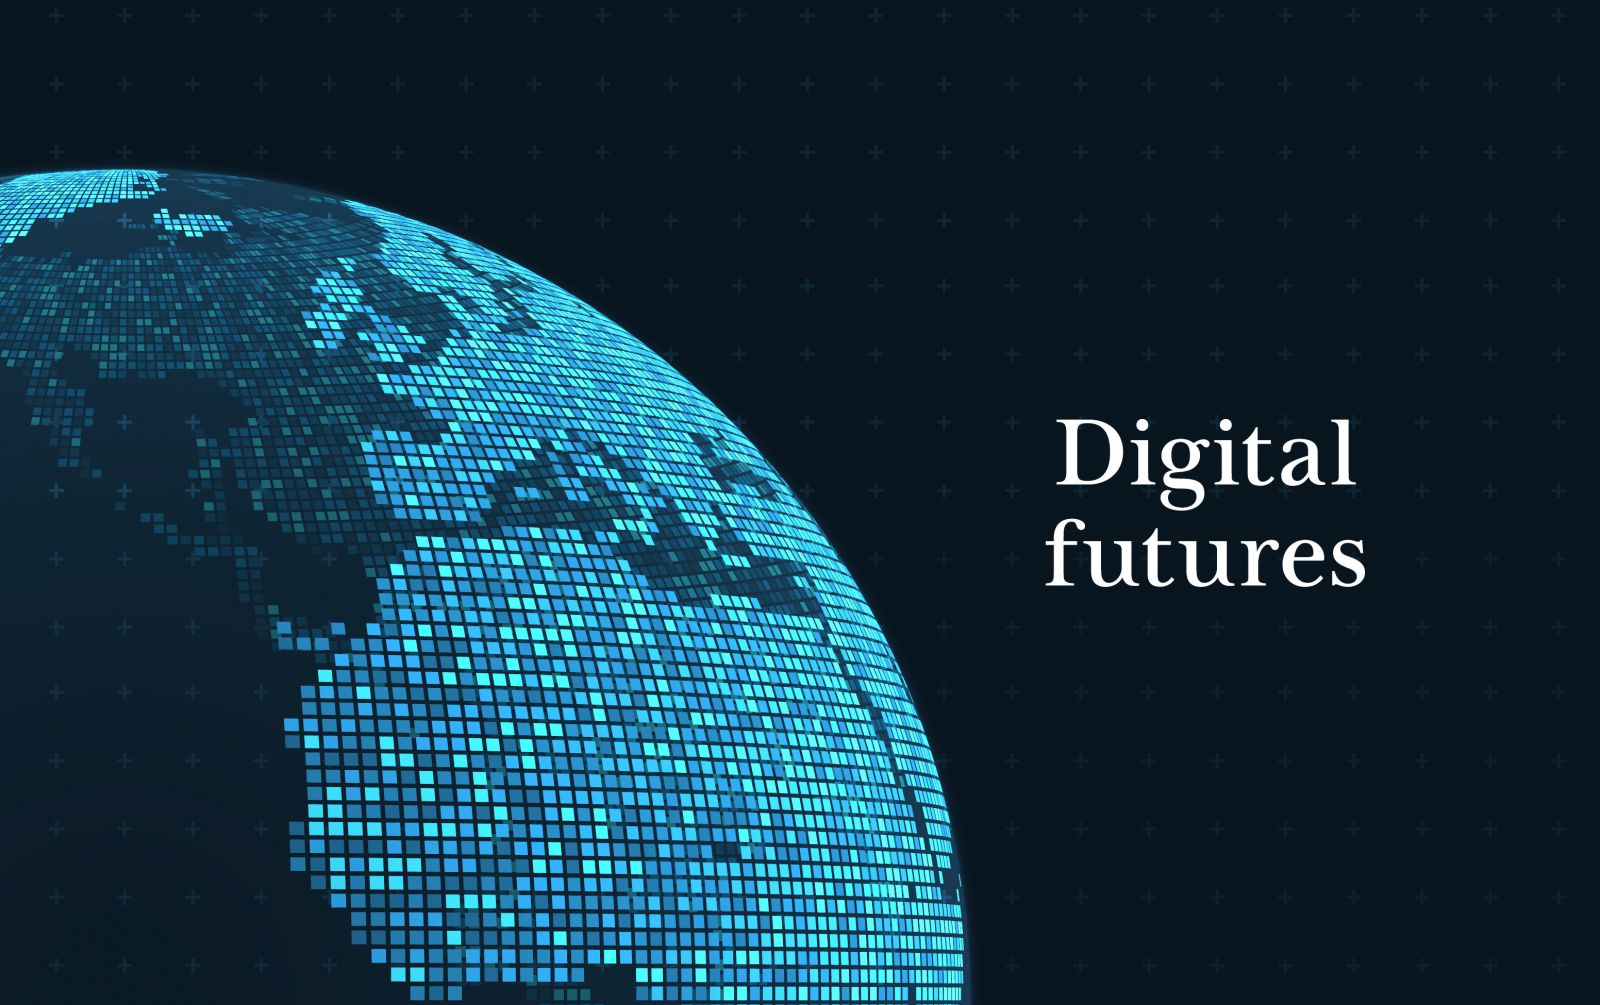 A black background with small plus symbols and the words 'Digital Futures' beside a globe made out of plus symbols and lit up blue squares